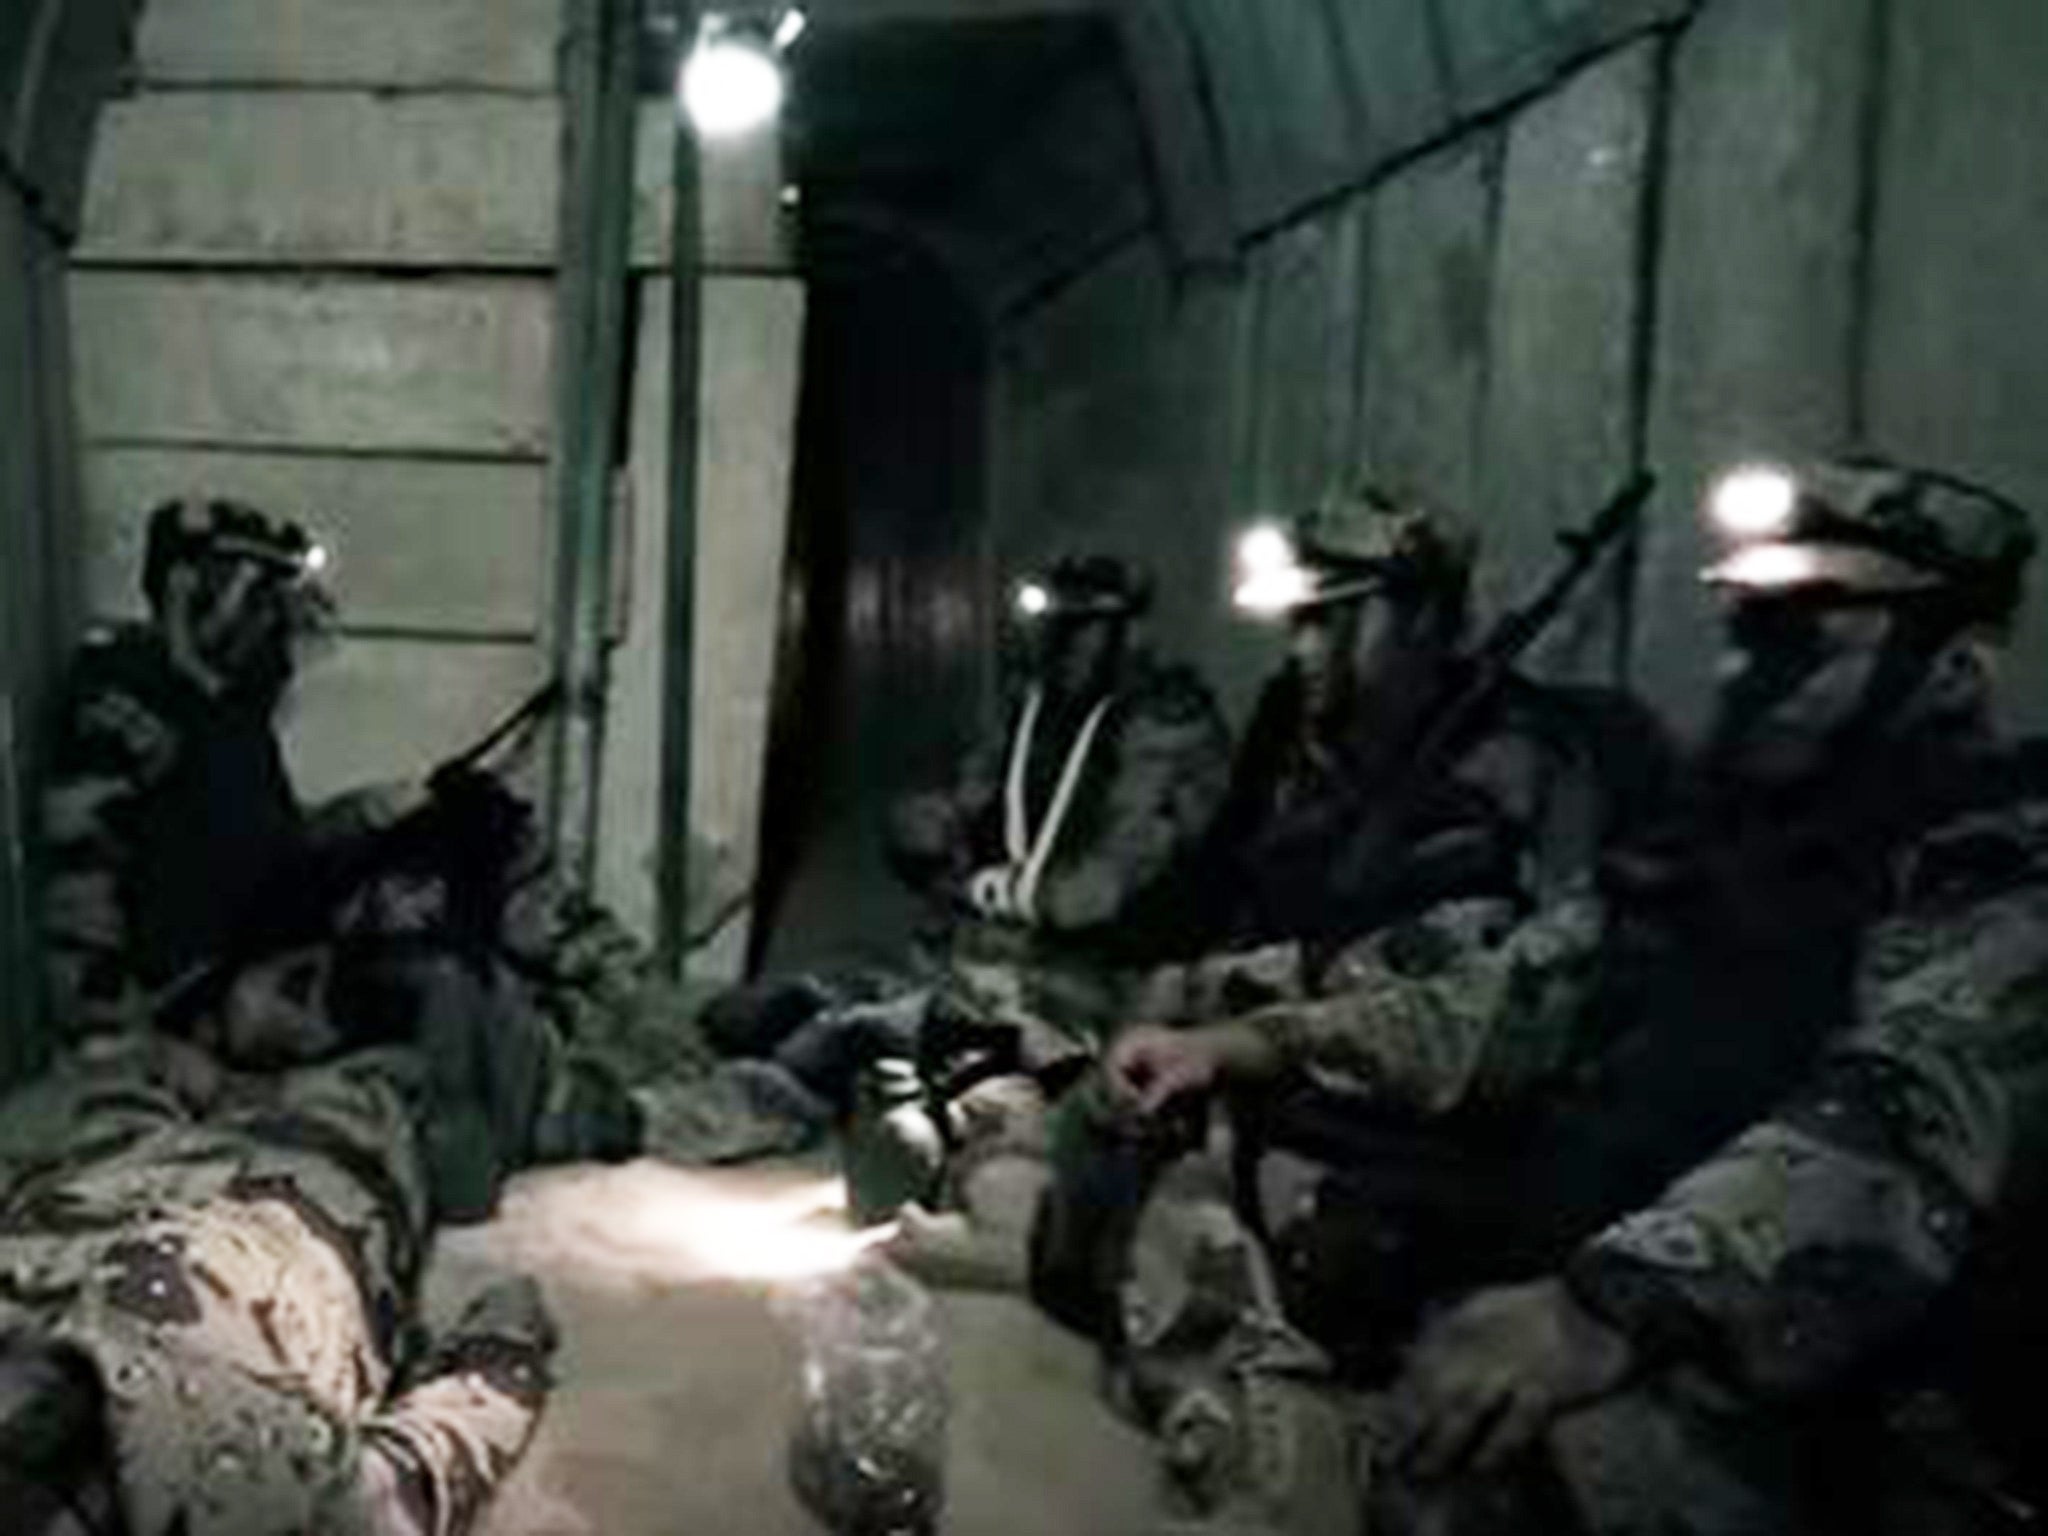 Hamas fighters pictured in the reported tunnel